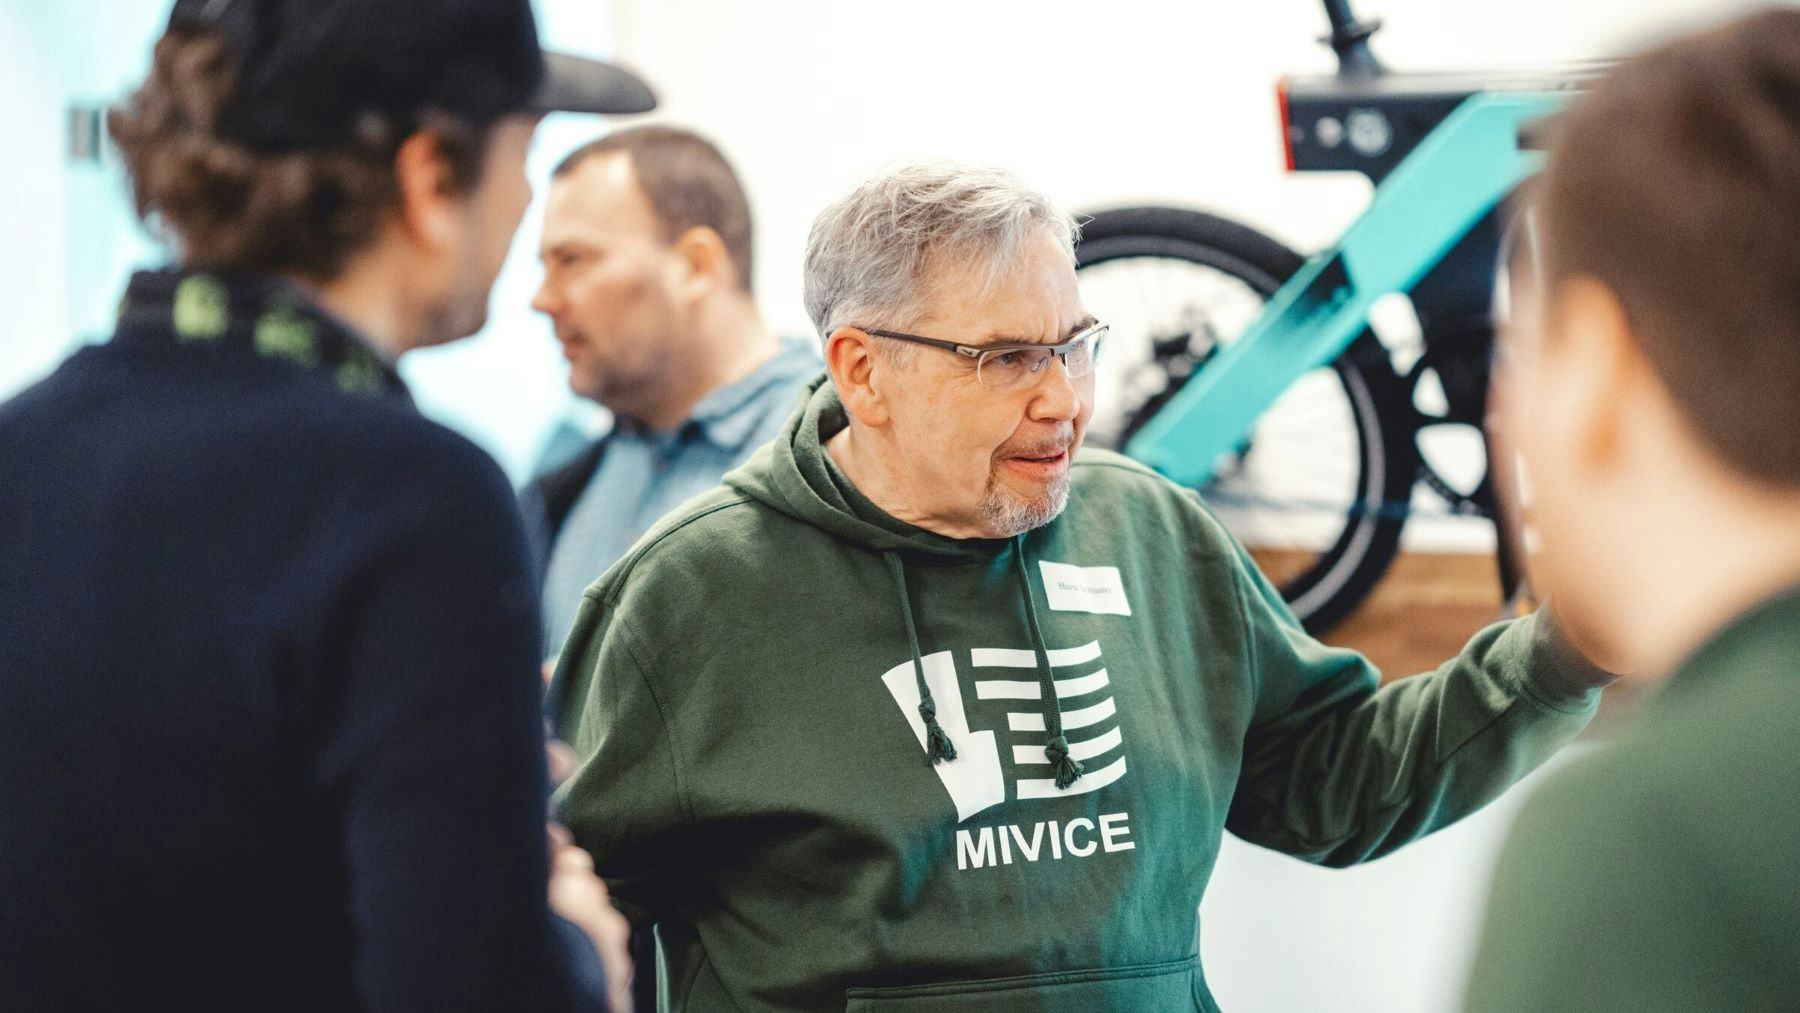 Mivice Europe CEO Horst Schuster invited guests at the opening to test ride and examine the complete Mivice drivetrain range. – Photo Mivice